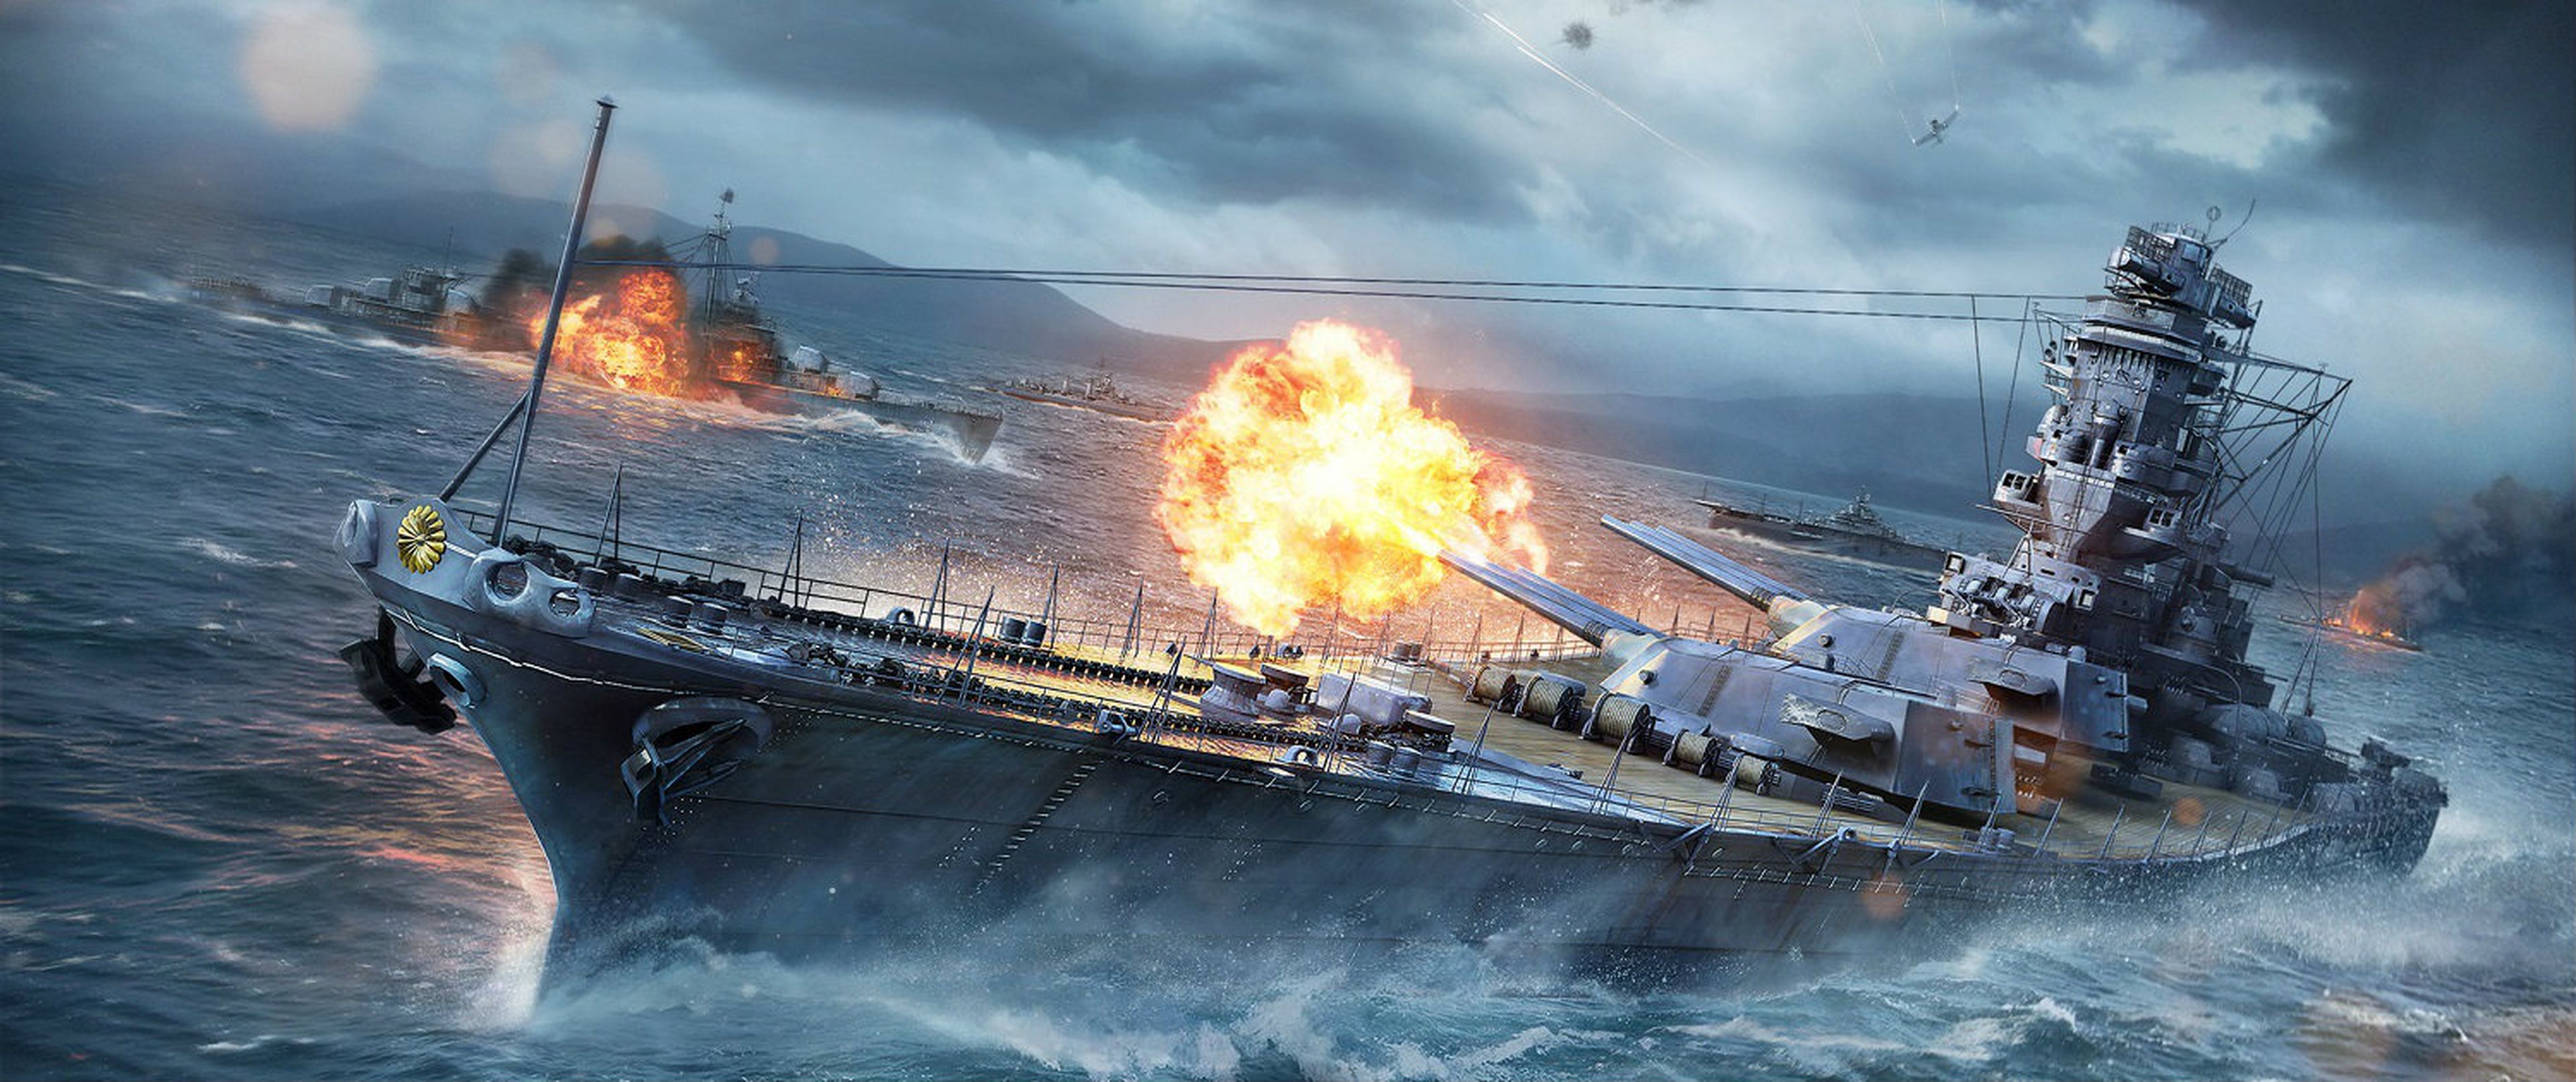 Wold of Warship BLITZ